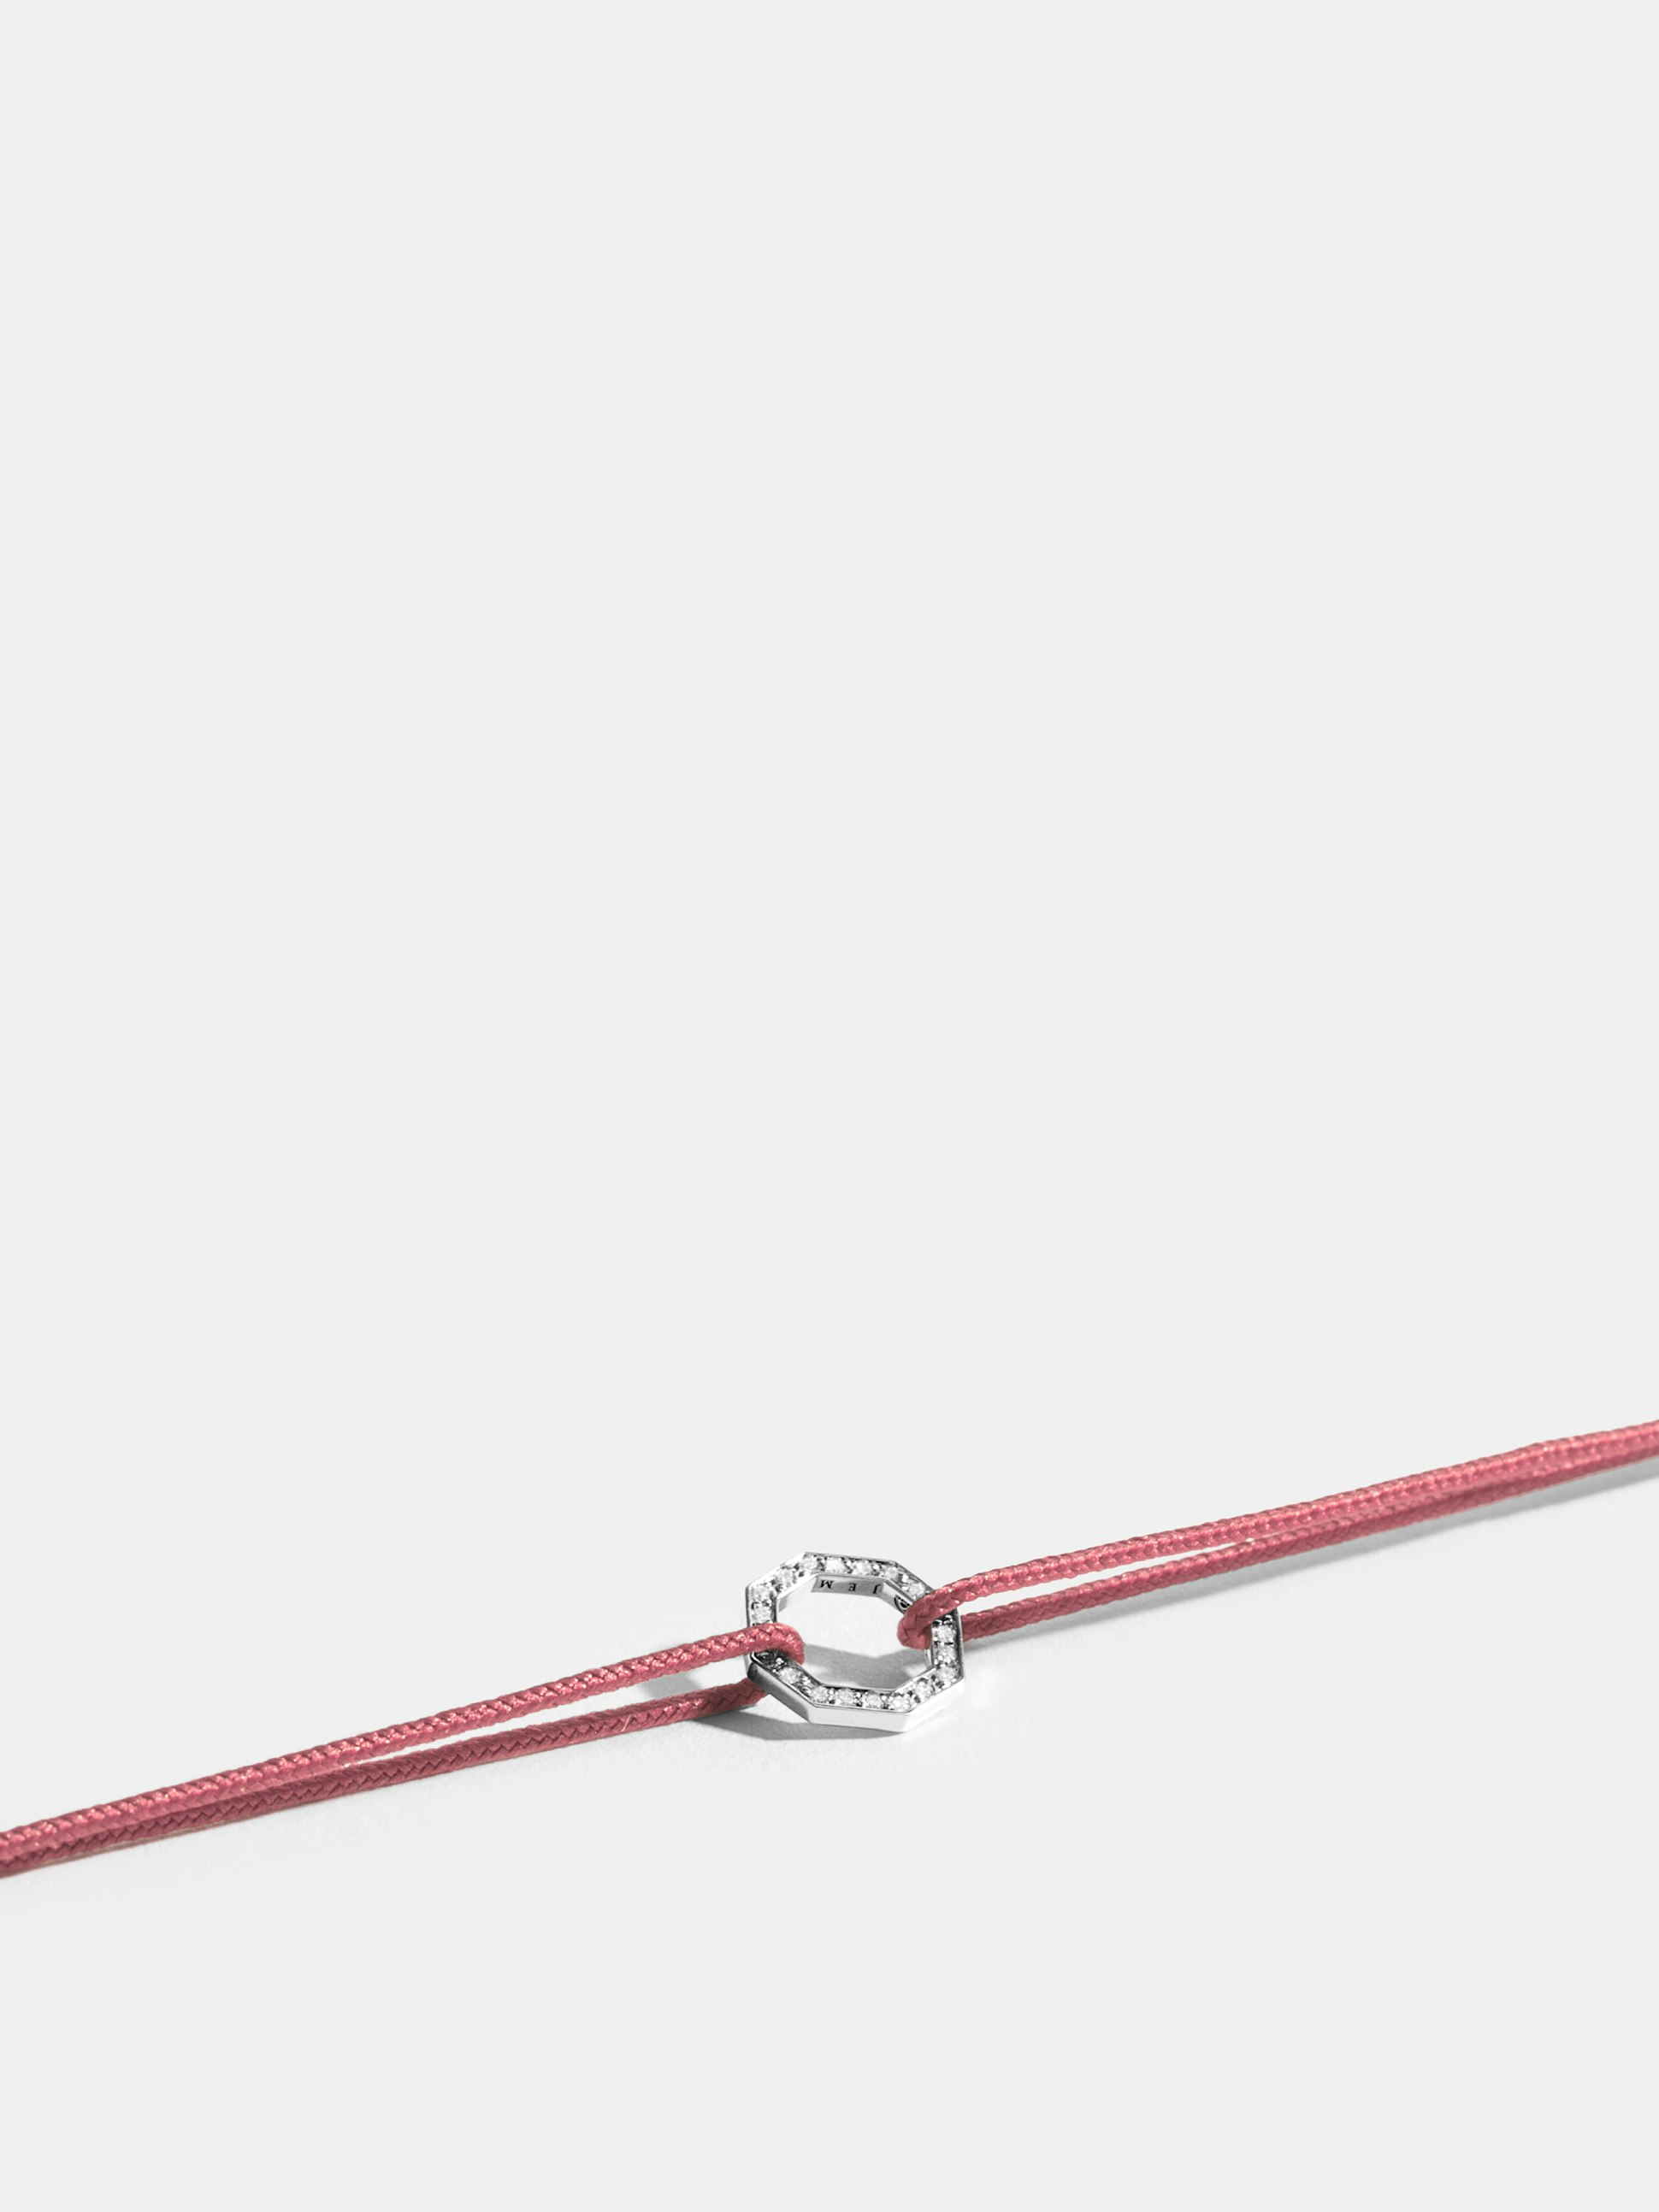 Octogone motif in 18k Fairmined ethical white gold, paved with lab-grown diamonds, on an antique pink cord.